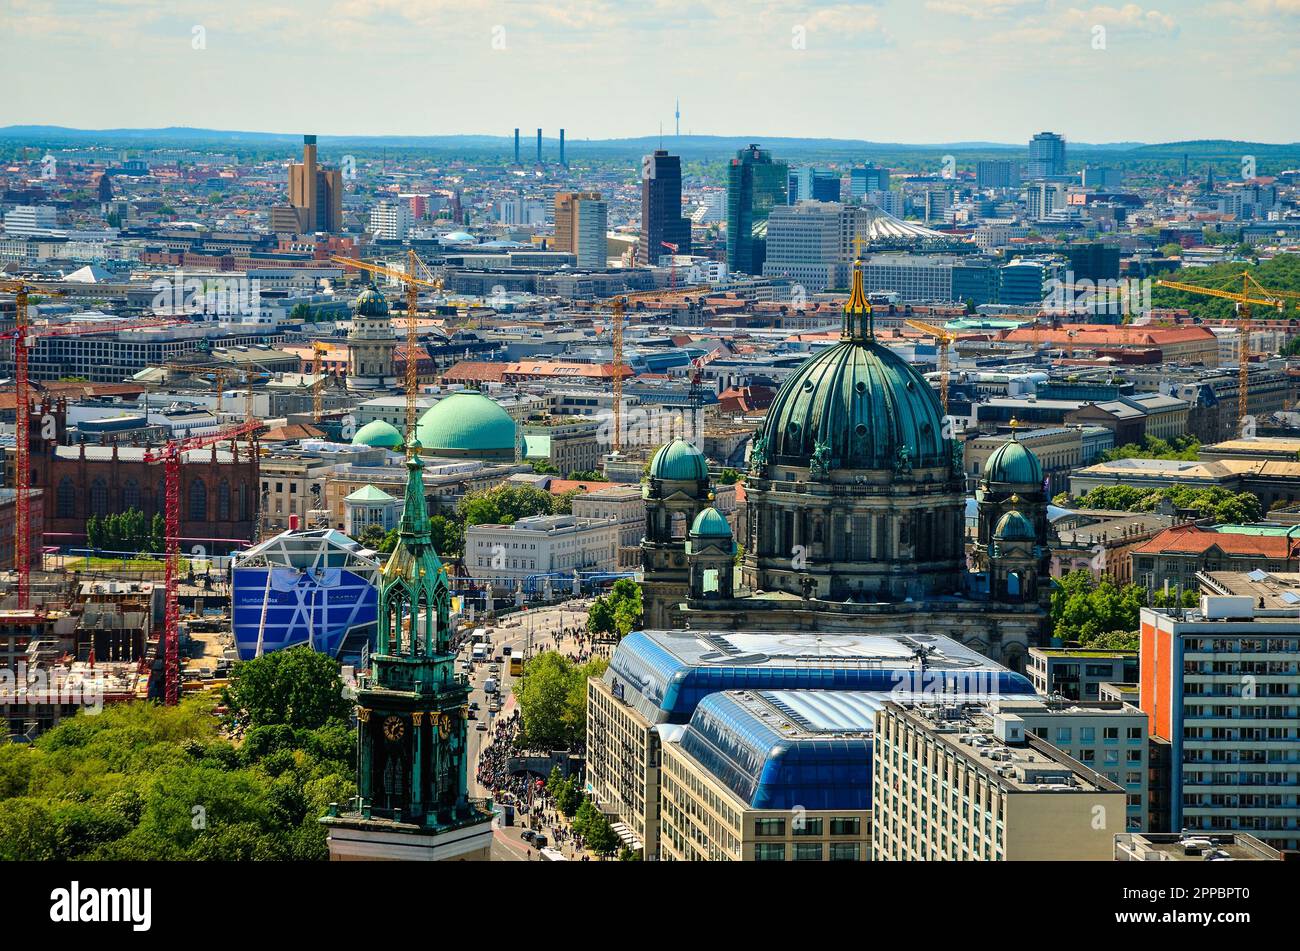 Berlin, Germany - May 3, 2014: Aerial view of Berlin. Panorama of Berlin seen from the roof of the hotel Park Inn by Radisson in Alexanderplatz. Stock Photo